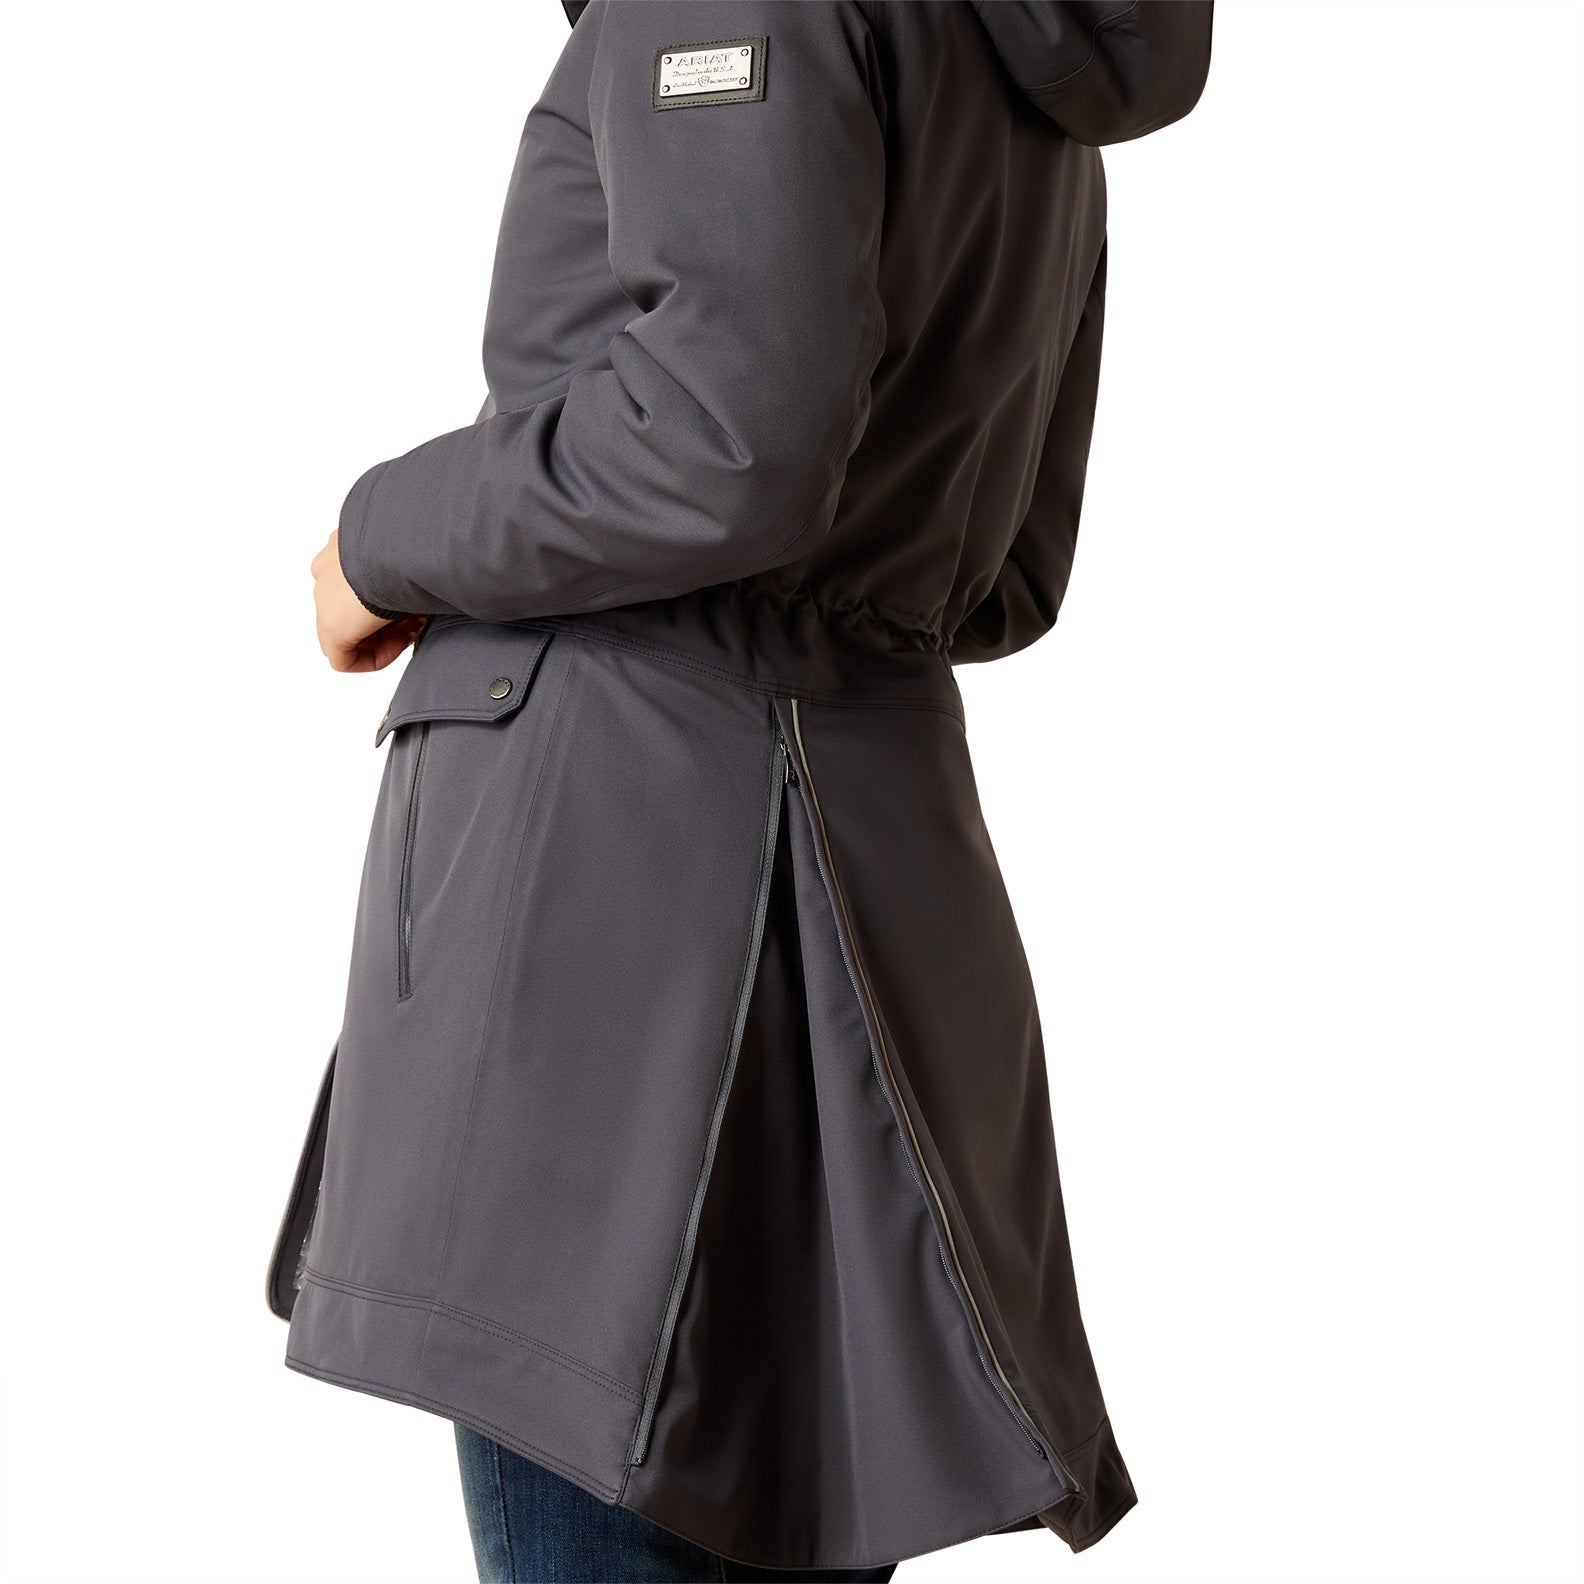 Ariat Tempest Waterproof Insulated Parka